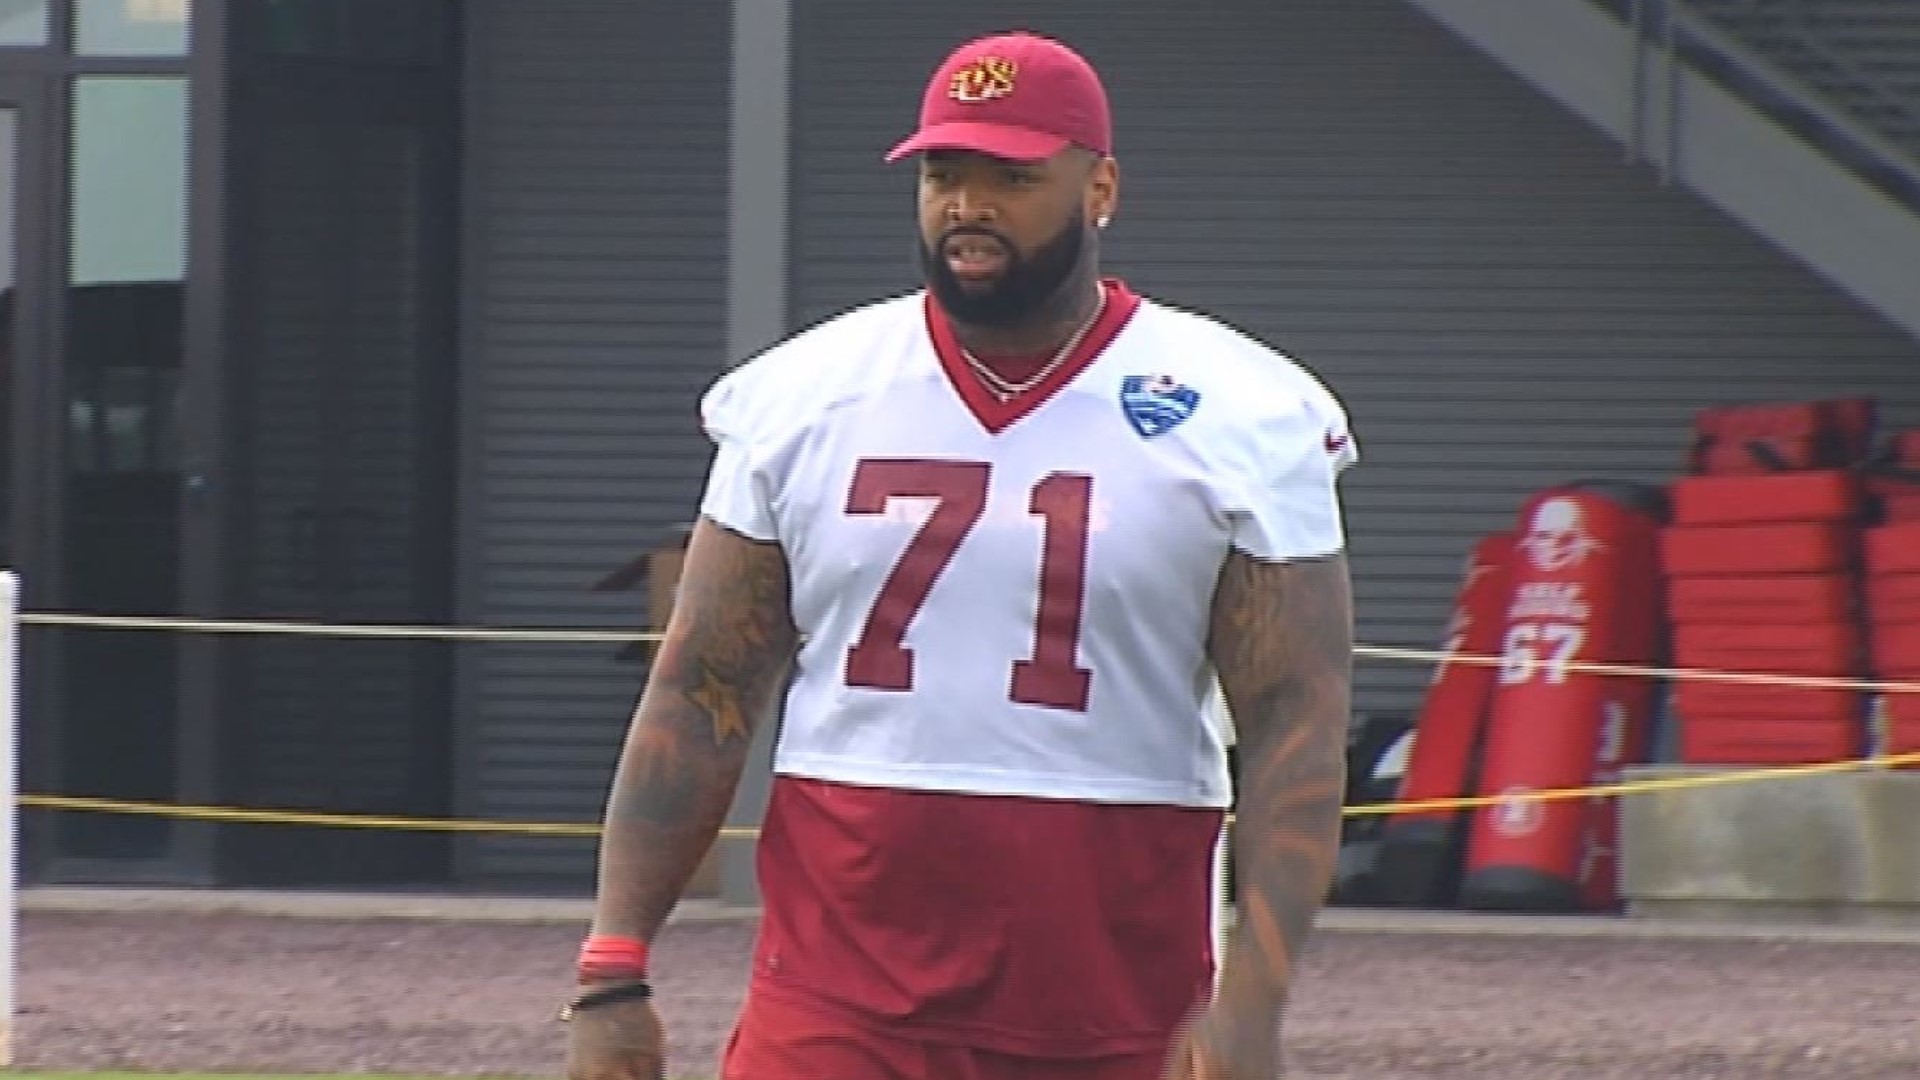 Trent Williams was reportedly upset about how the team has handled his health.